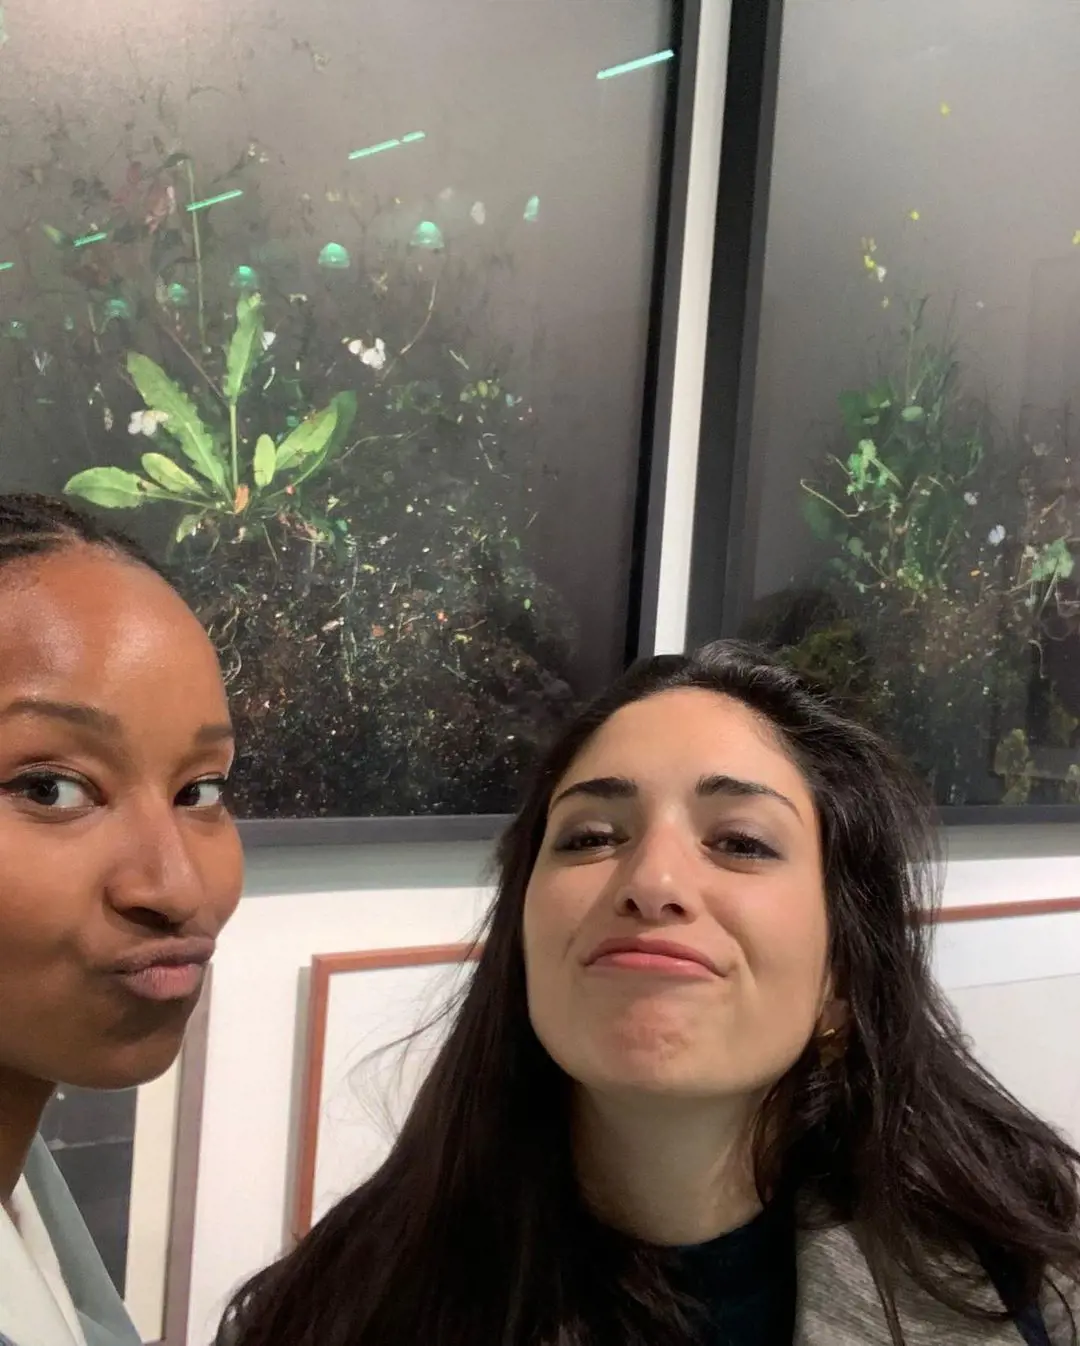 Bakalarou with her partner Ashleigh in Woolwich Contemp Print Fair which is the biggest celebration of original contemporary print. They attended it on November 2021 and documented some of their favorites from it